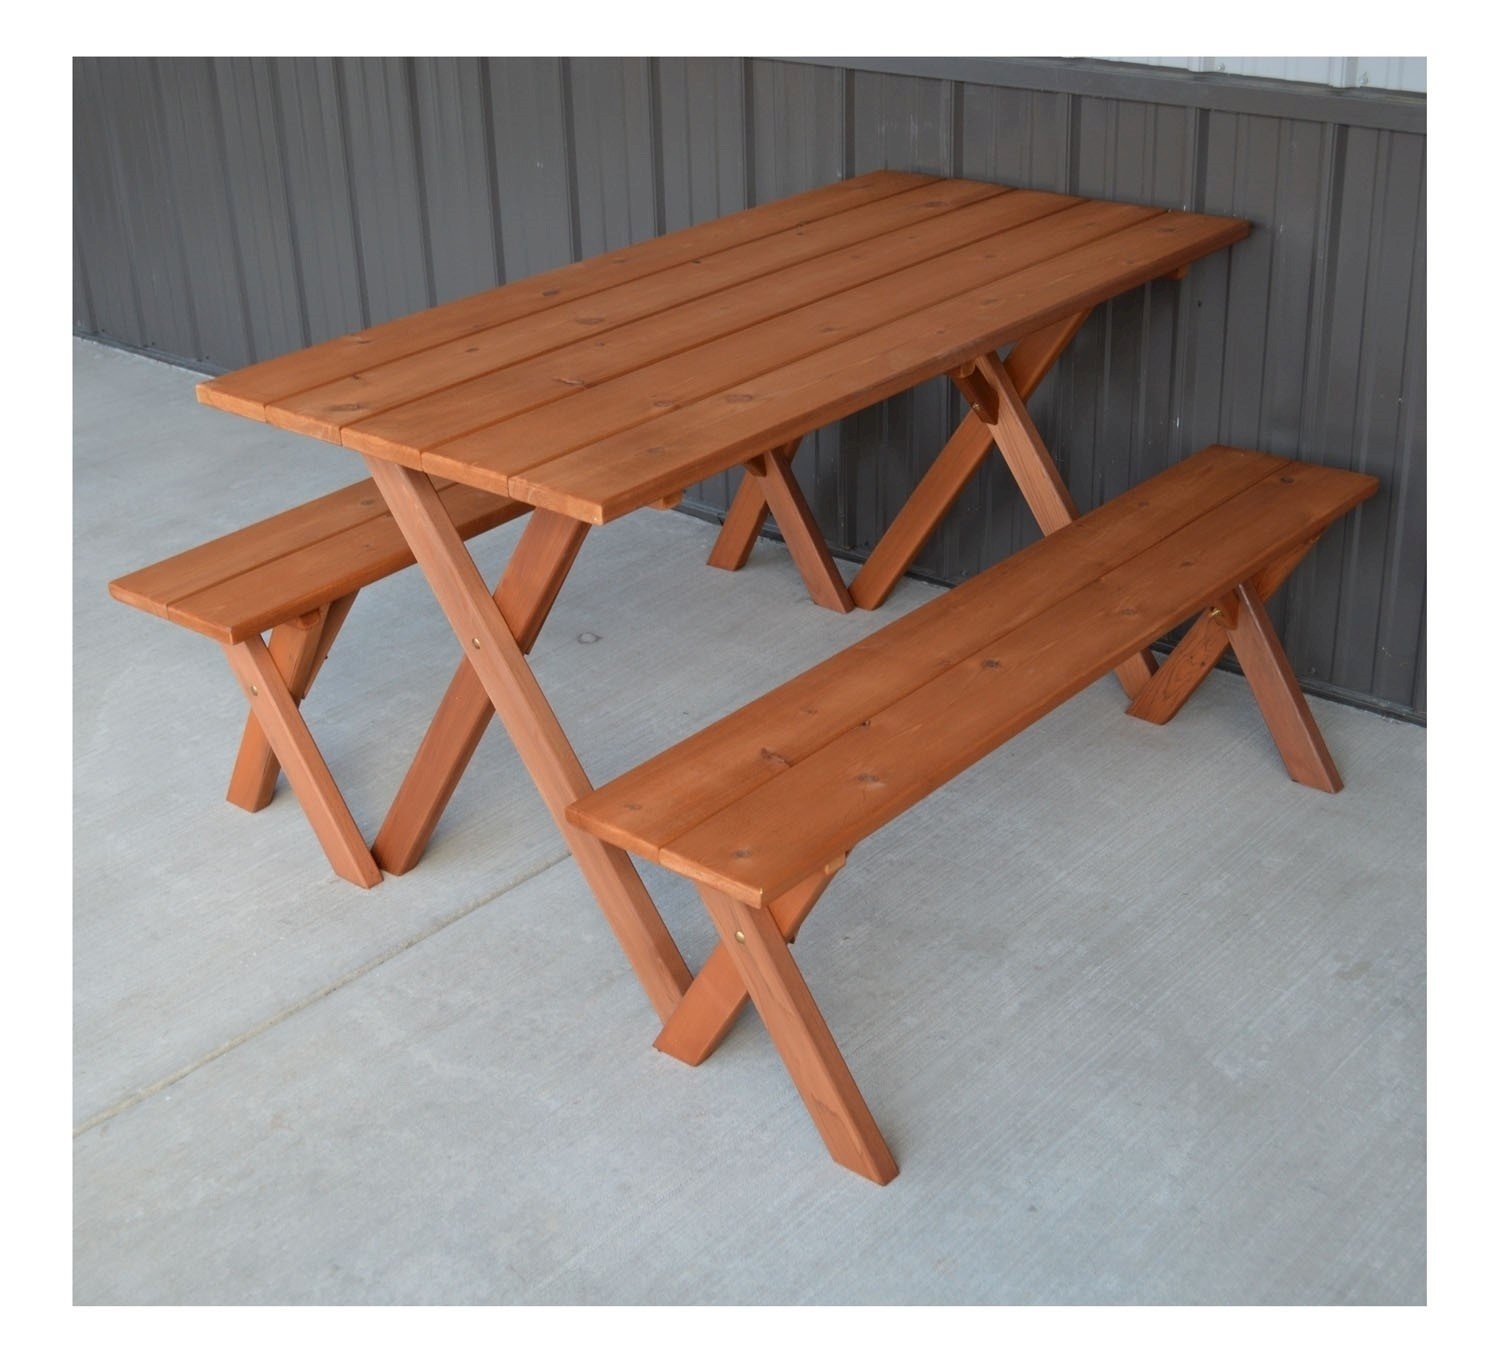 5 Ft Crossleg Wooden Picnic Table With 2 Detached Benches Picnic